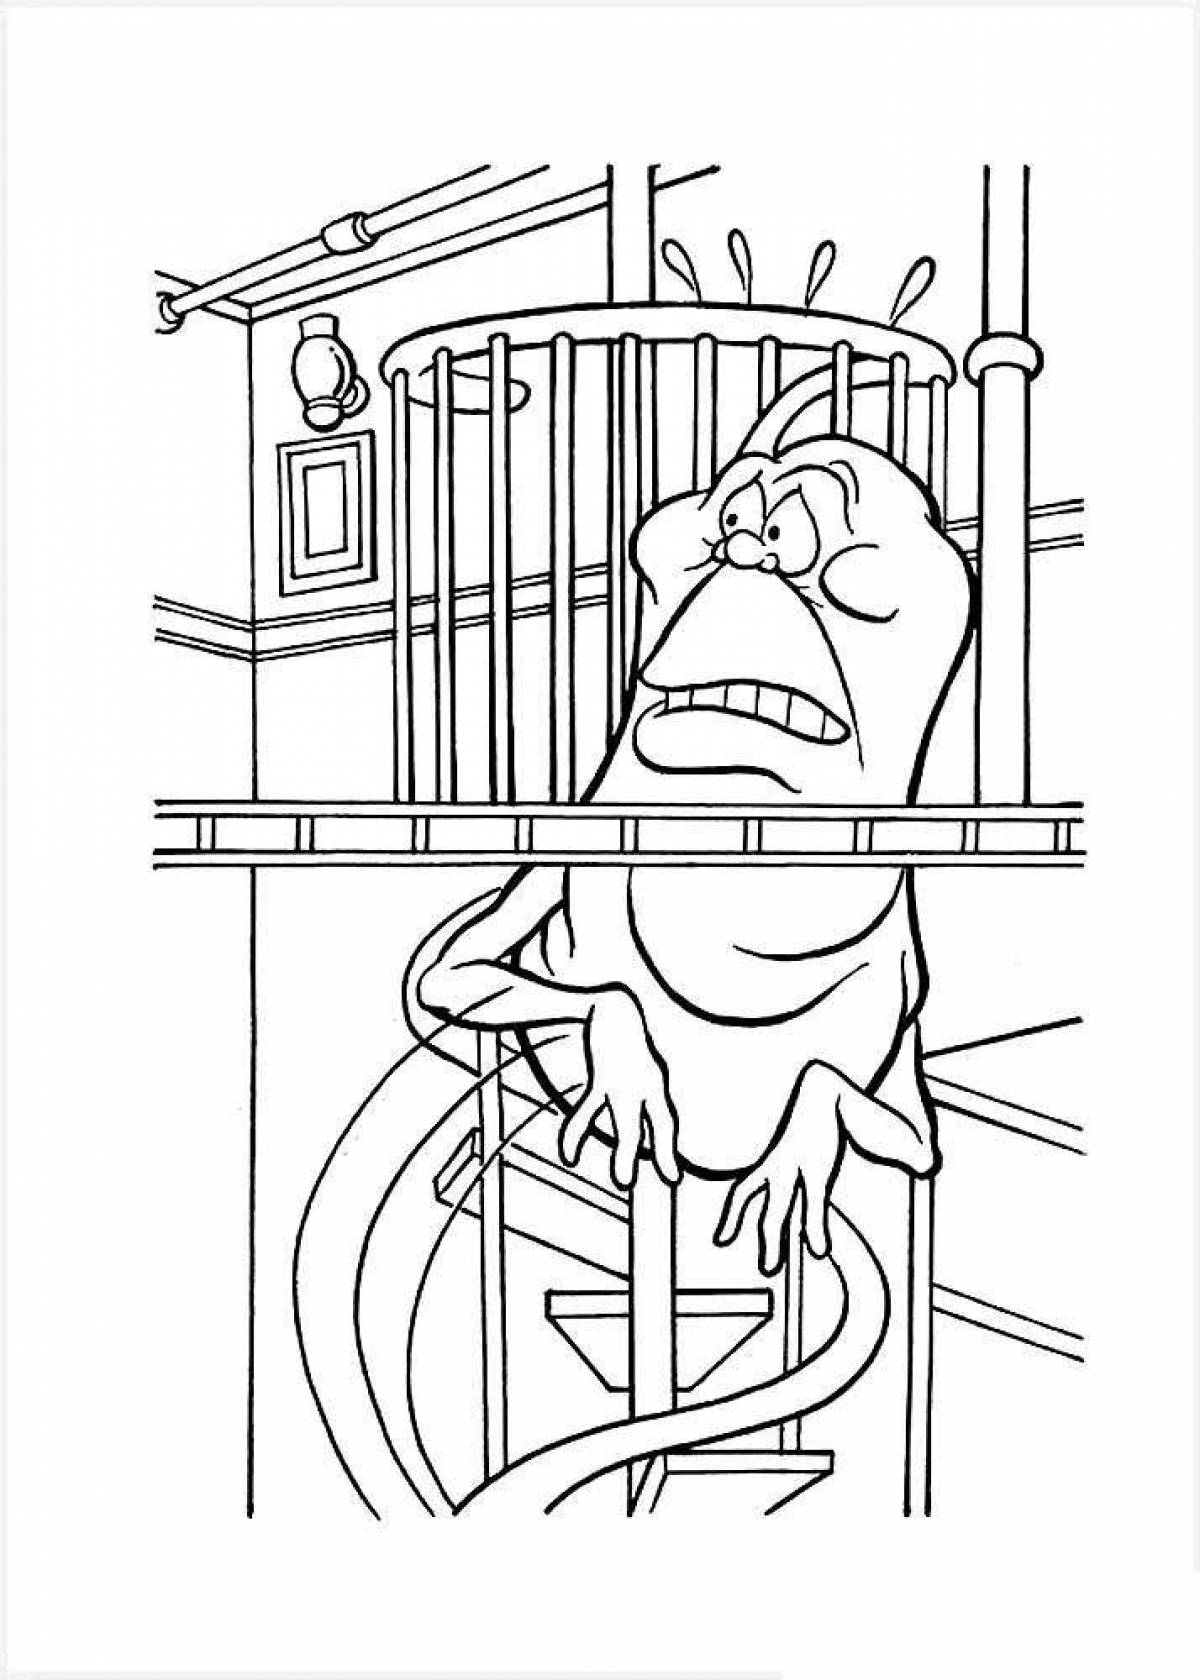 Colorful ghostbusters coloring page